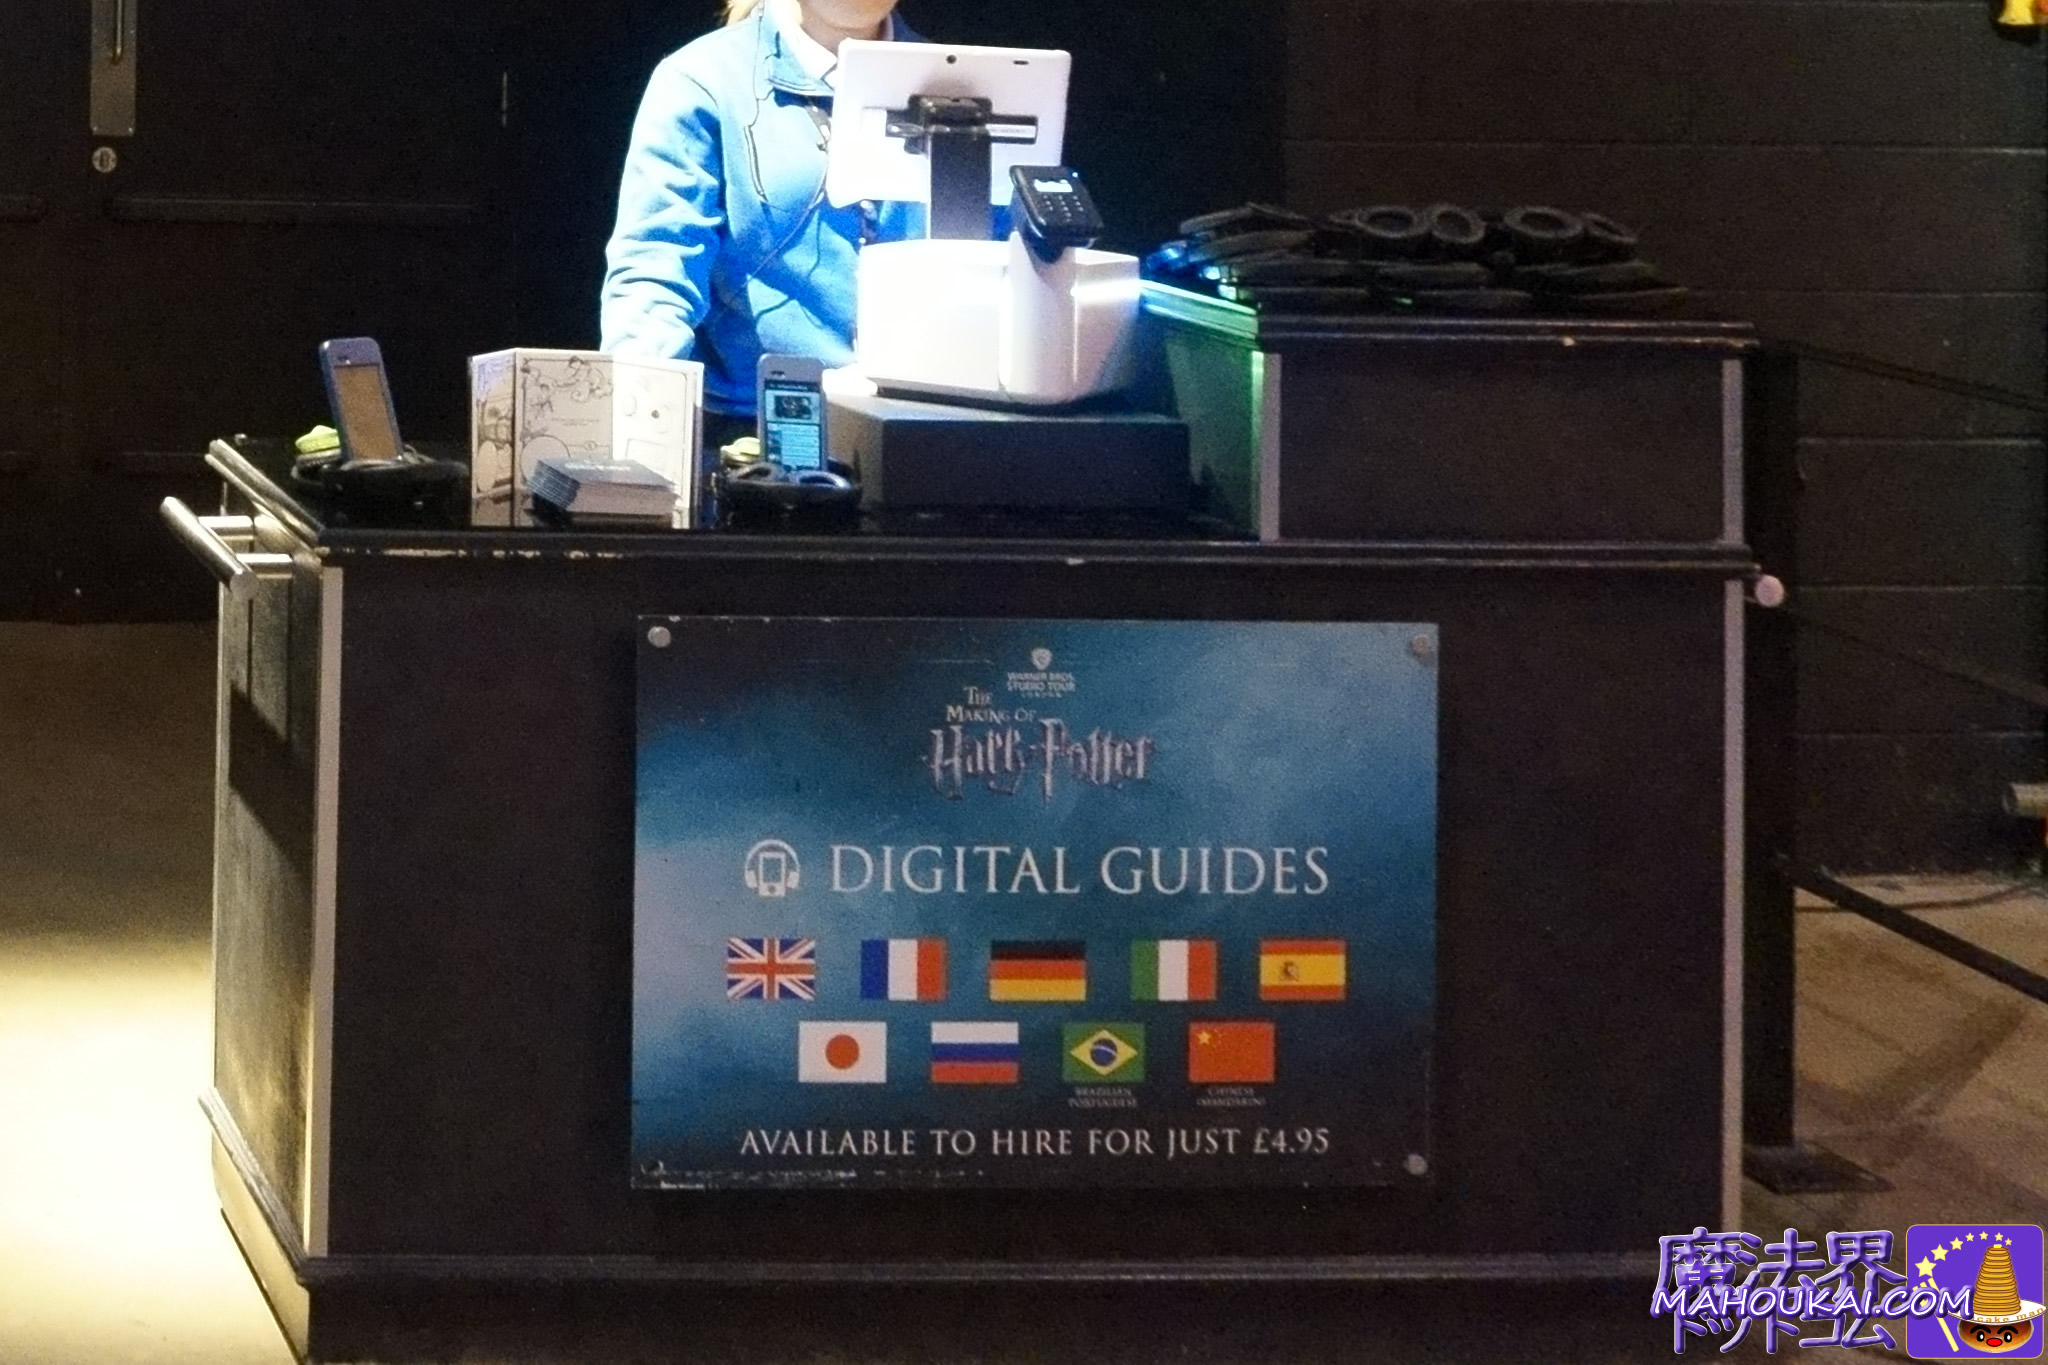 Lending Counter 2: Digital Guide & Stamp Rally Reception (after entrance to Studio Tour) Harry Potter Studio Tour London